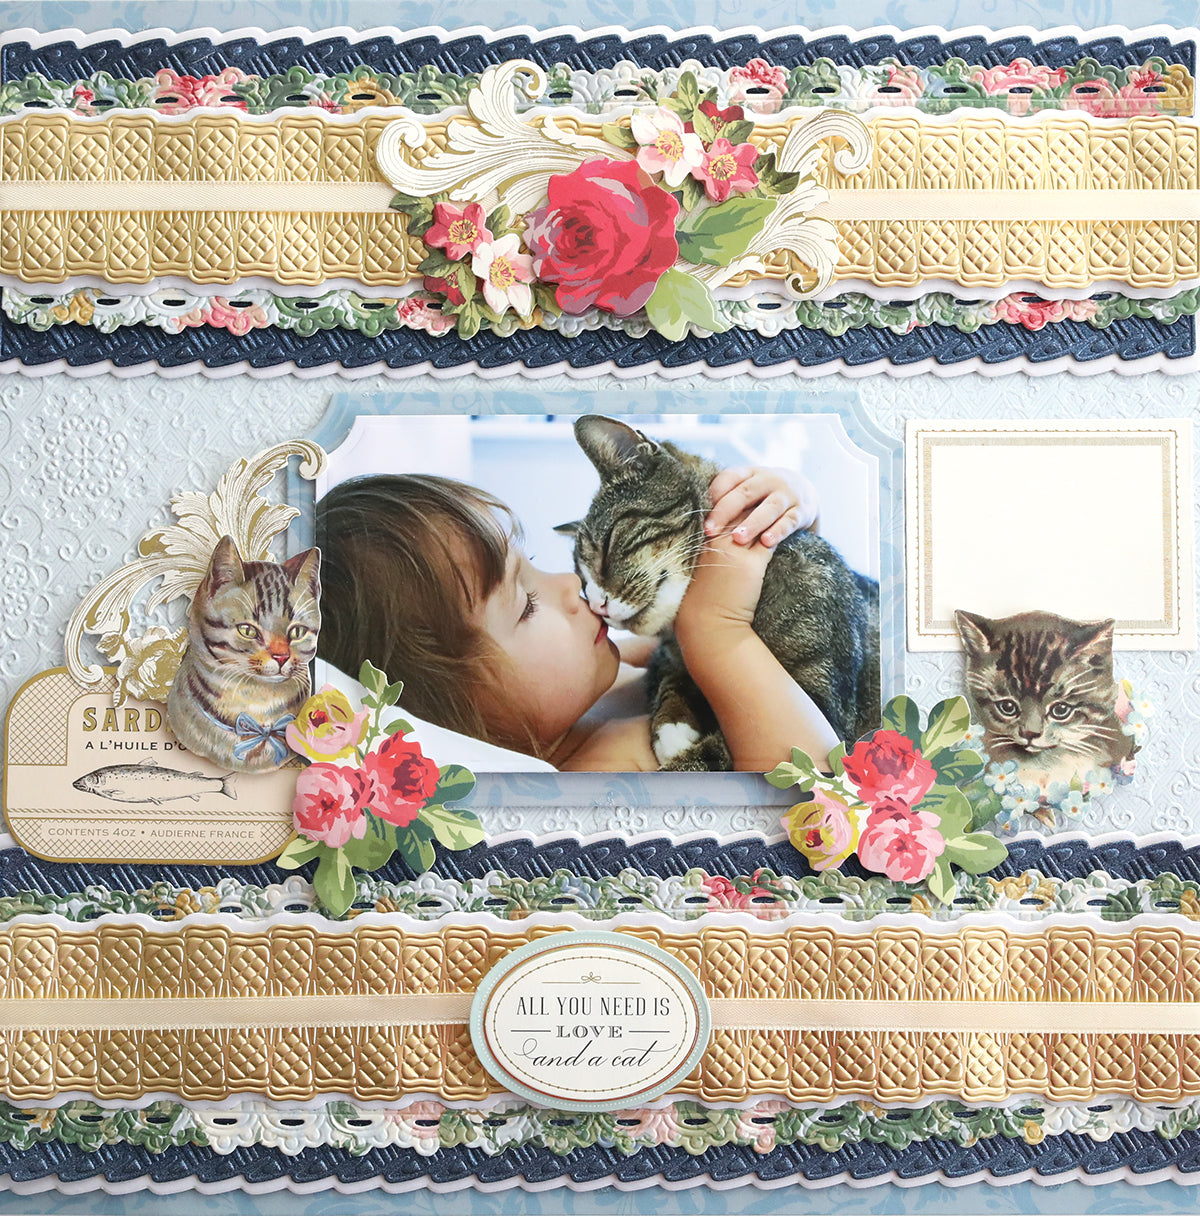 Scrapbook page featuring a person nuzzling a cat, floral decorations using cut and emboss dies, and text reading "All you need is love... and a cat." Two additional cat images, ornate frames, and 3D Ribbon Border 12" Dies are included.